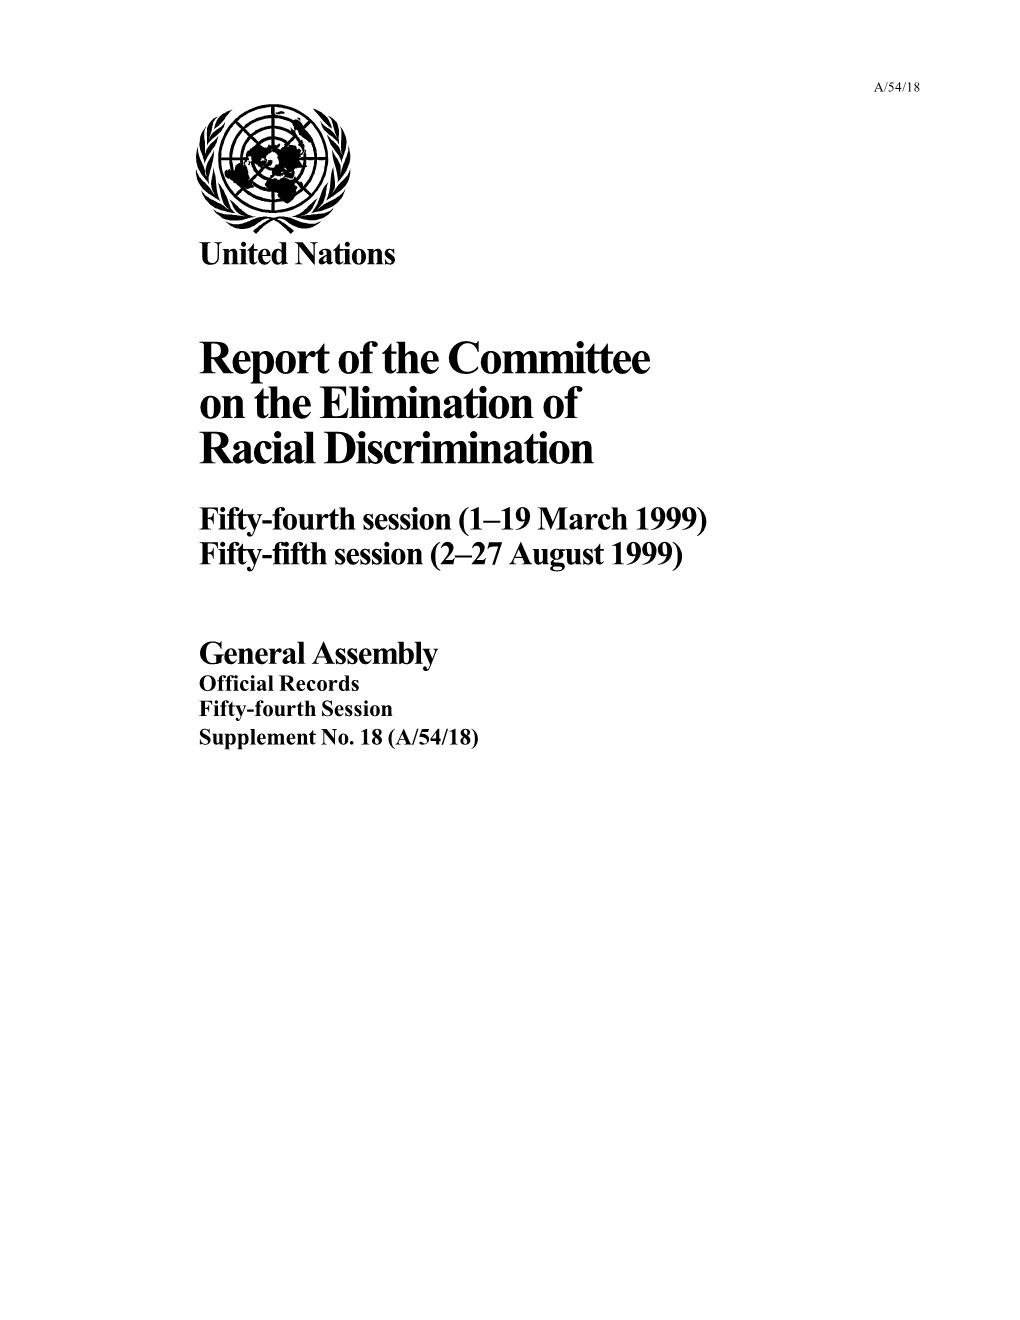 Report of the Committee on the Elimination of Racial Discrimination Fifty-Fourth Session (1–19 March 1999) Fifty-Fifth Session (2–27 August 1999)